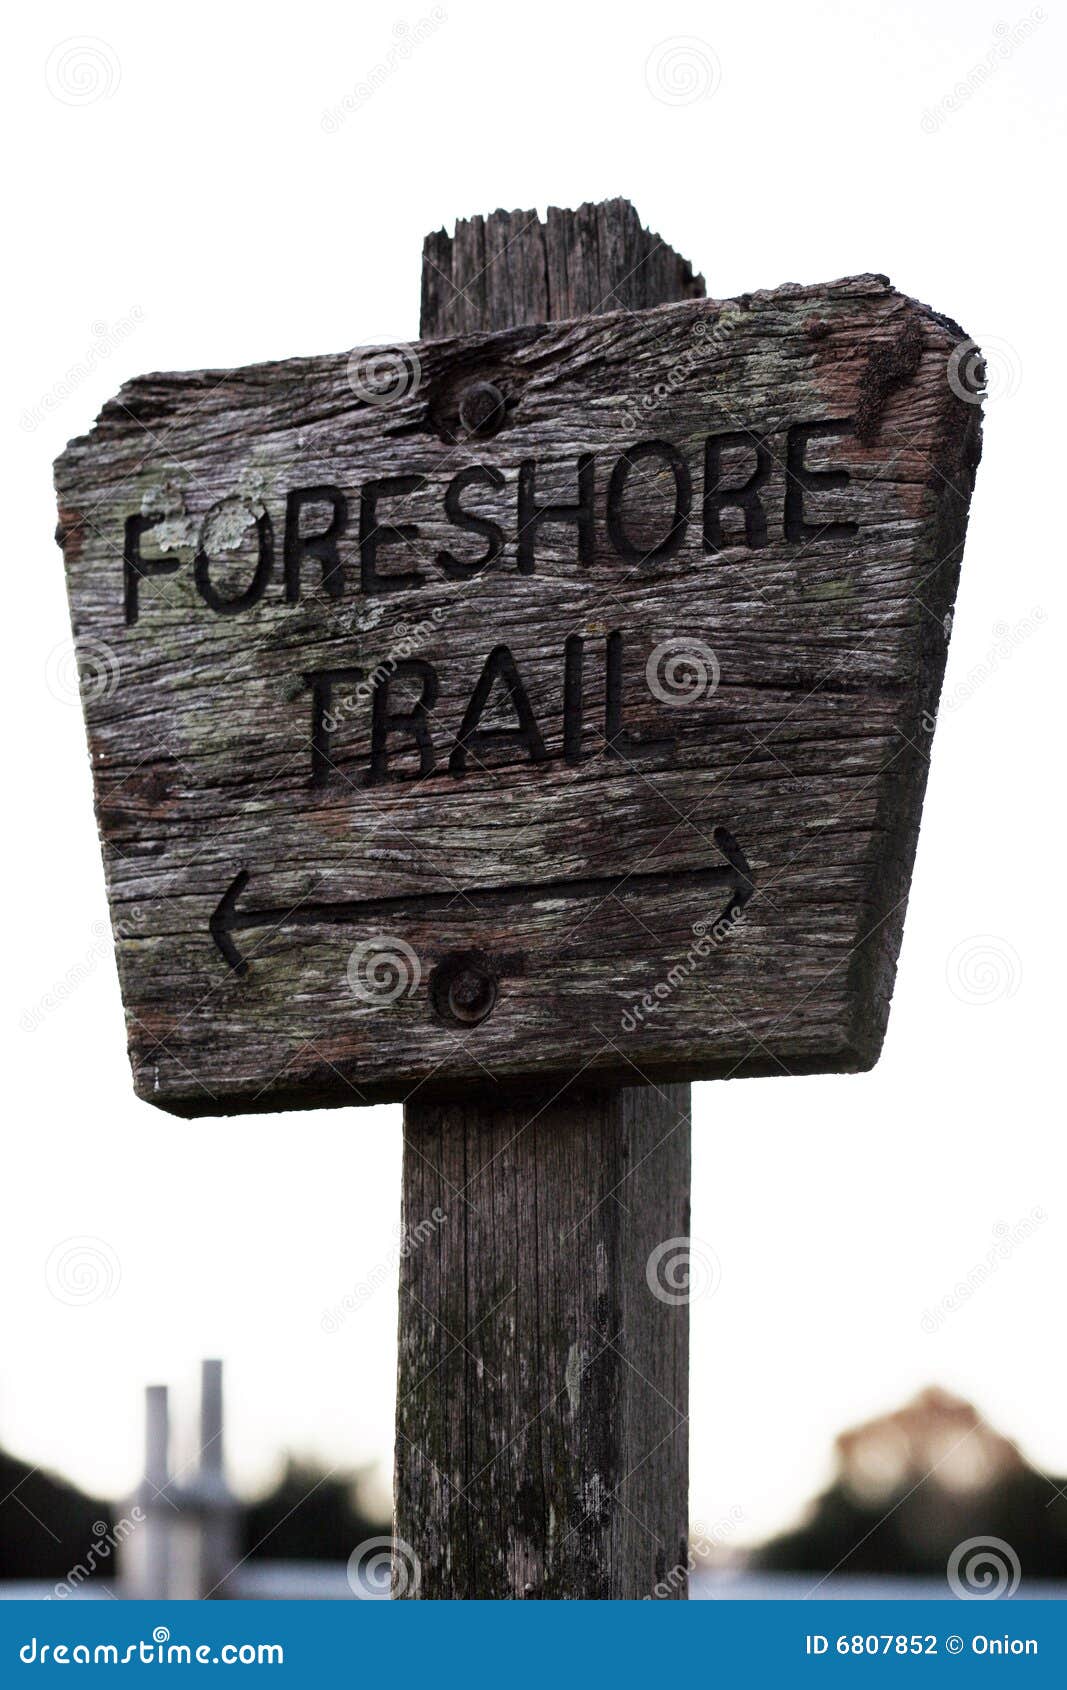 foreshore trail signage